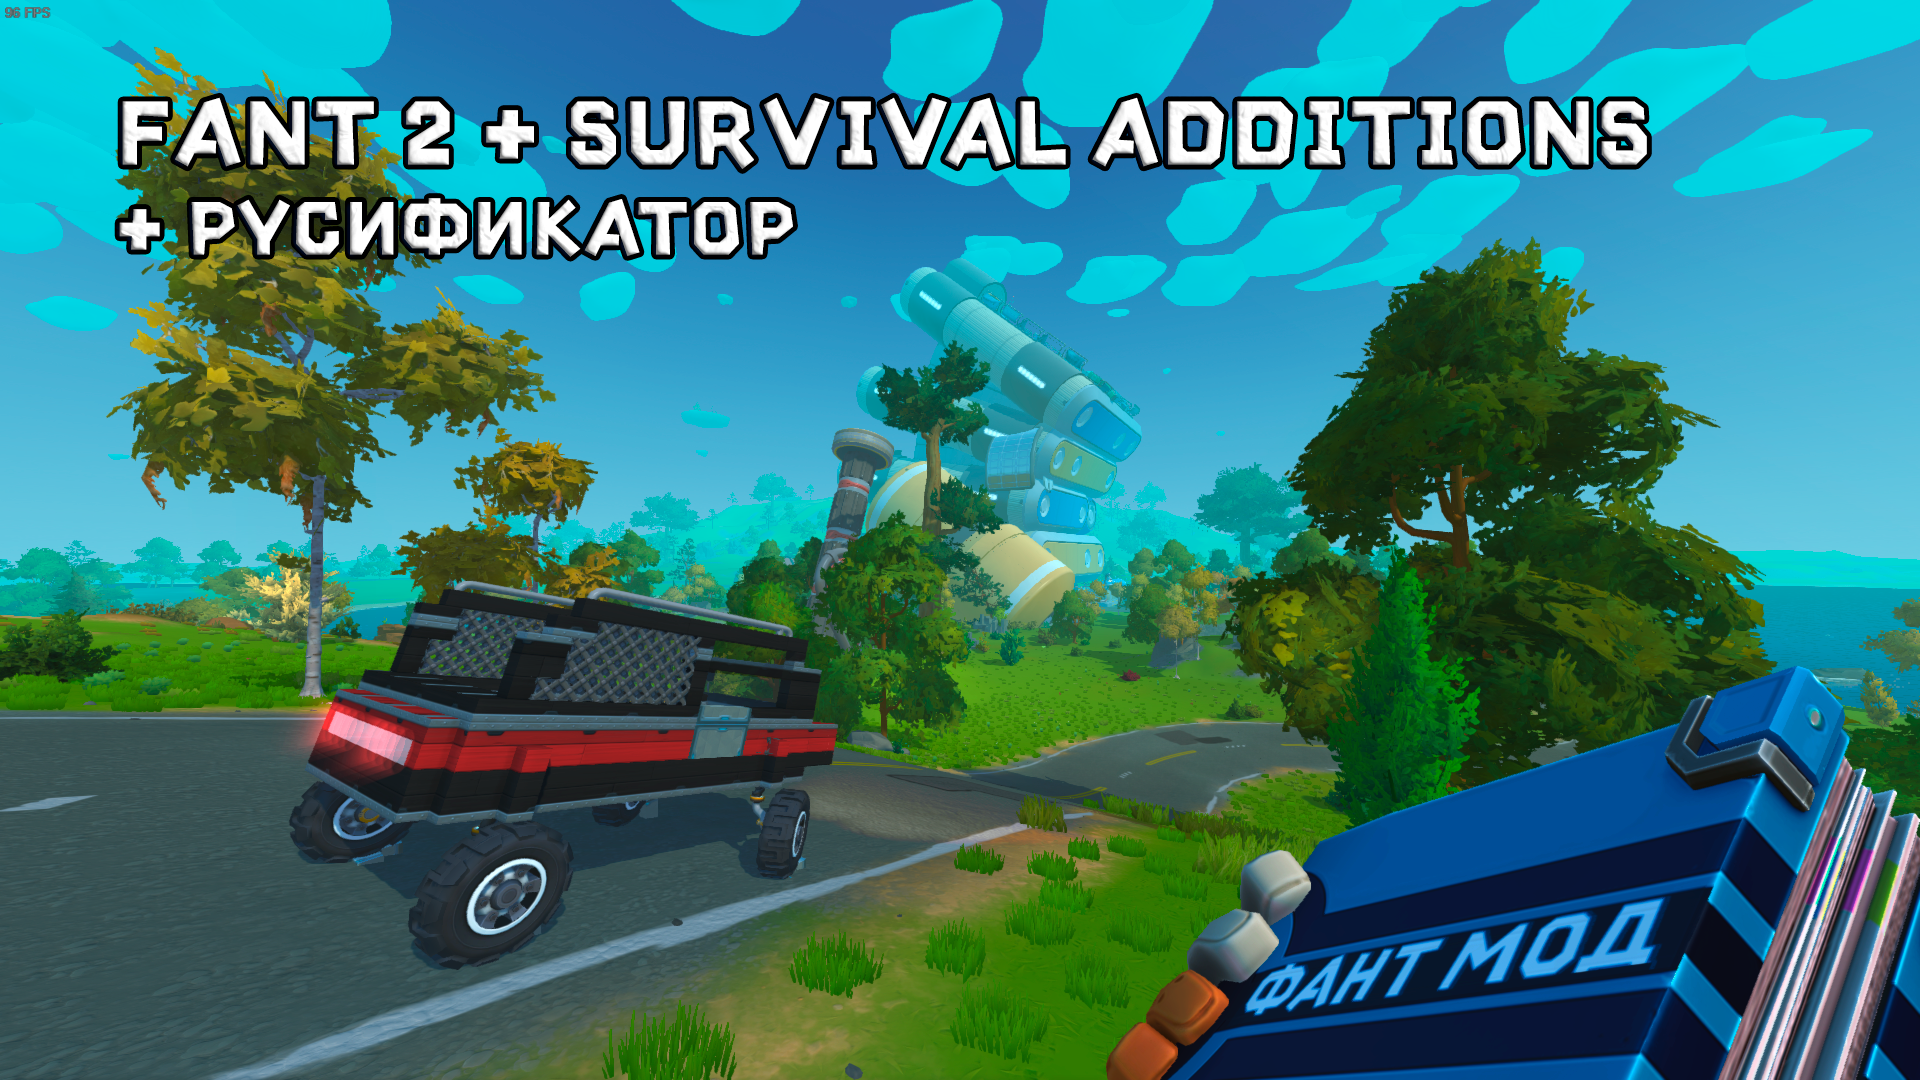 Fant 2 + Survival Additions